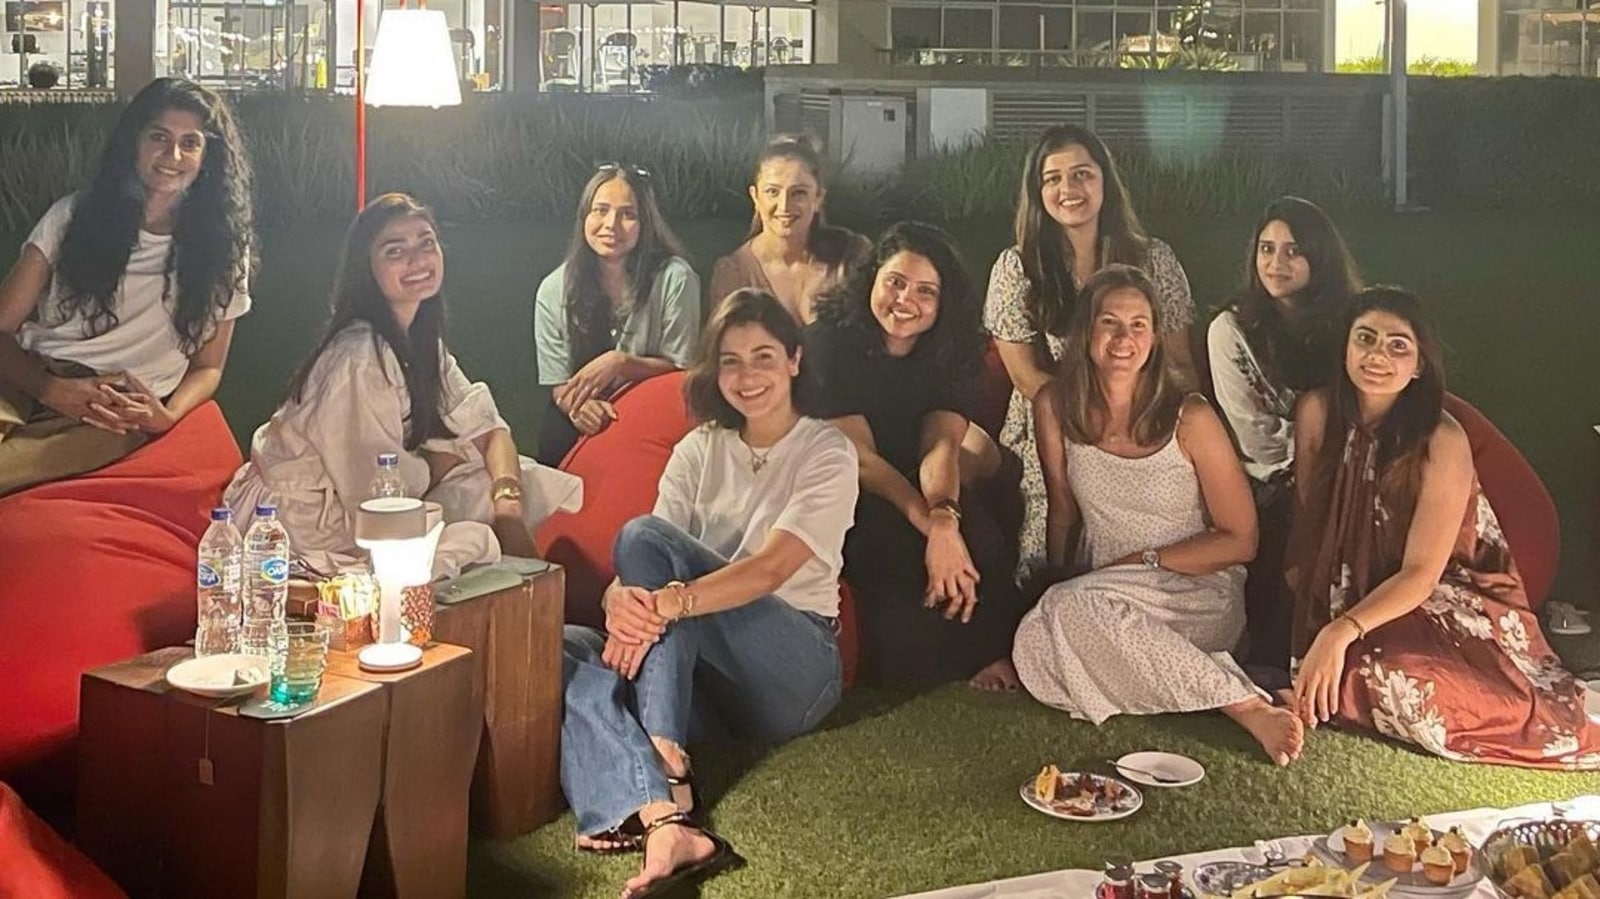 Anushka Sharma, Athiya Shetty join Rohit Sharmas wife Ritika and others for a tea party in throwback pics Bollywood picture pic